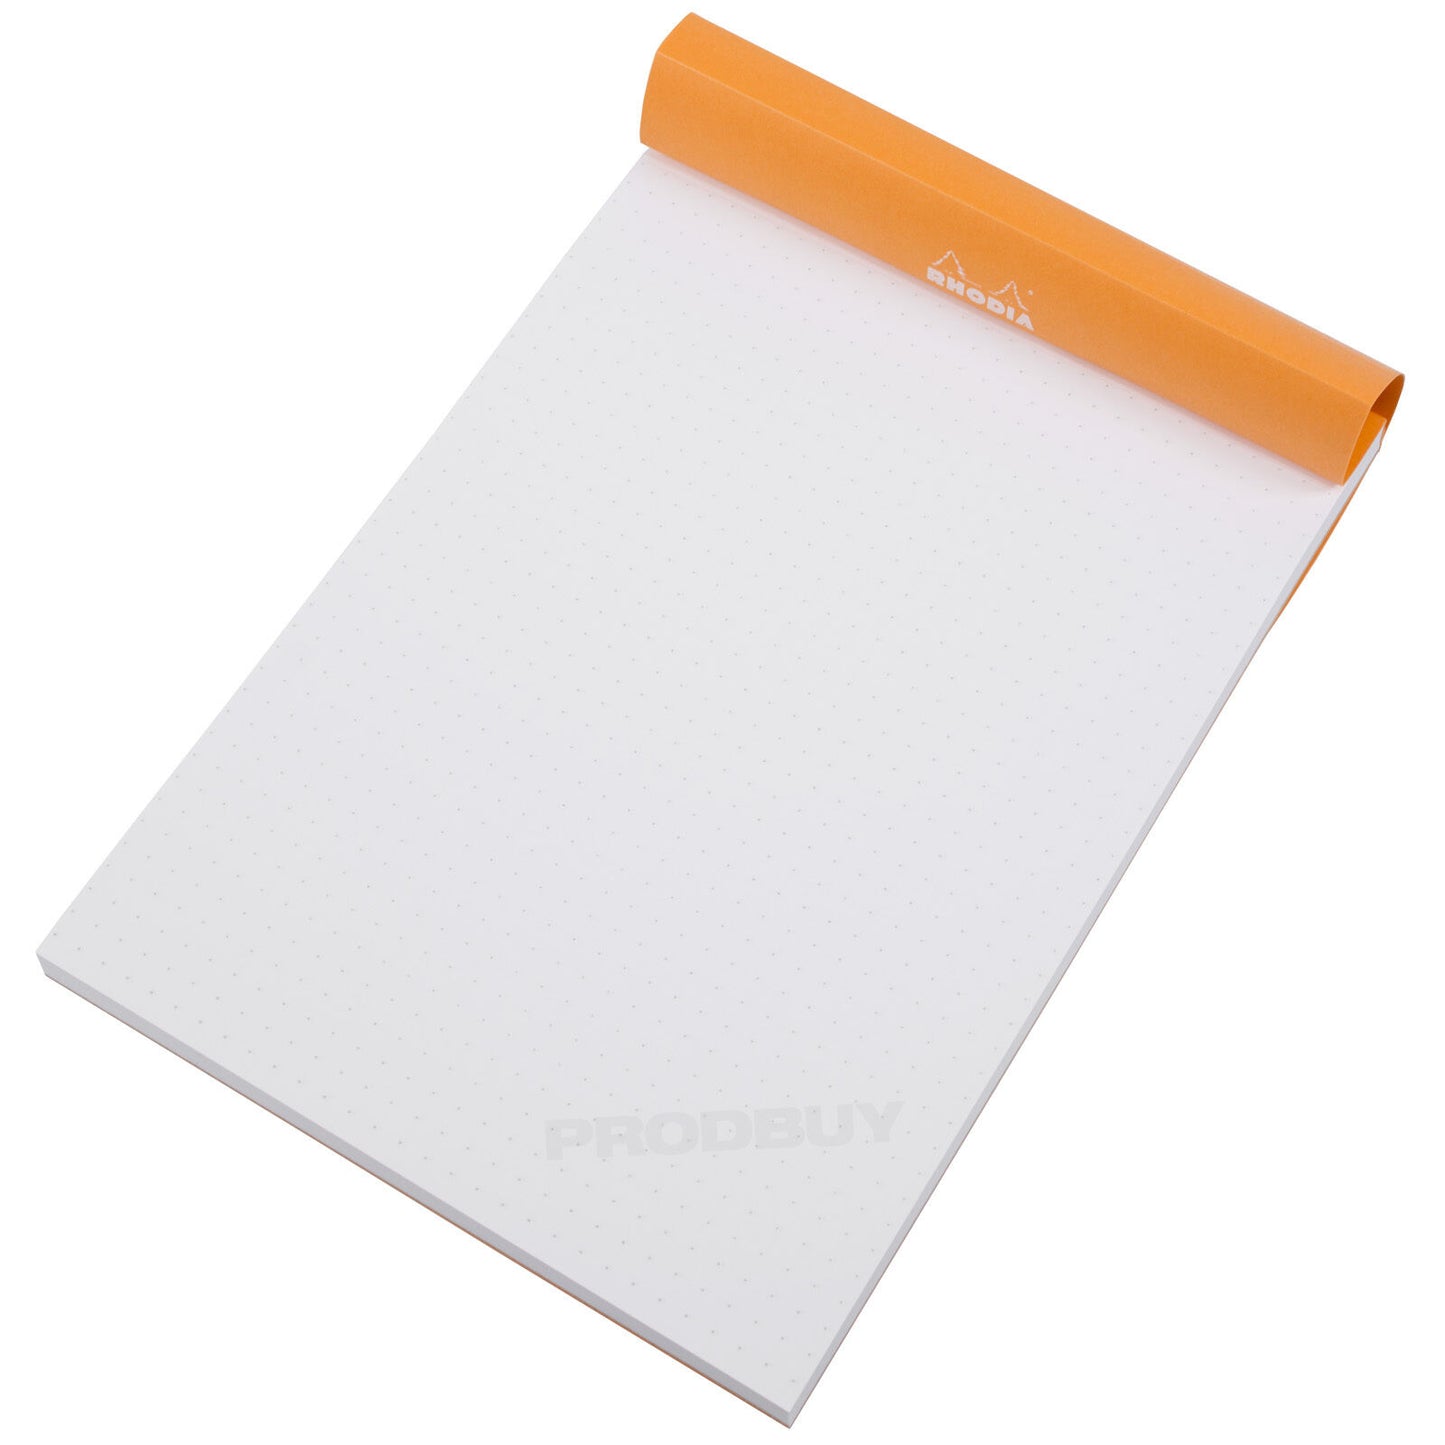 Set of 3 Rhodia A5 Notebooks with 5mm Dot Grid Bullet Pages & Orange Covers